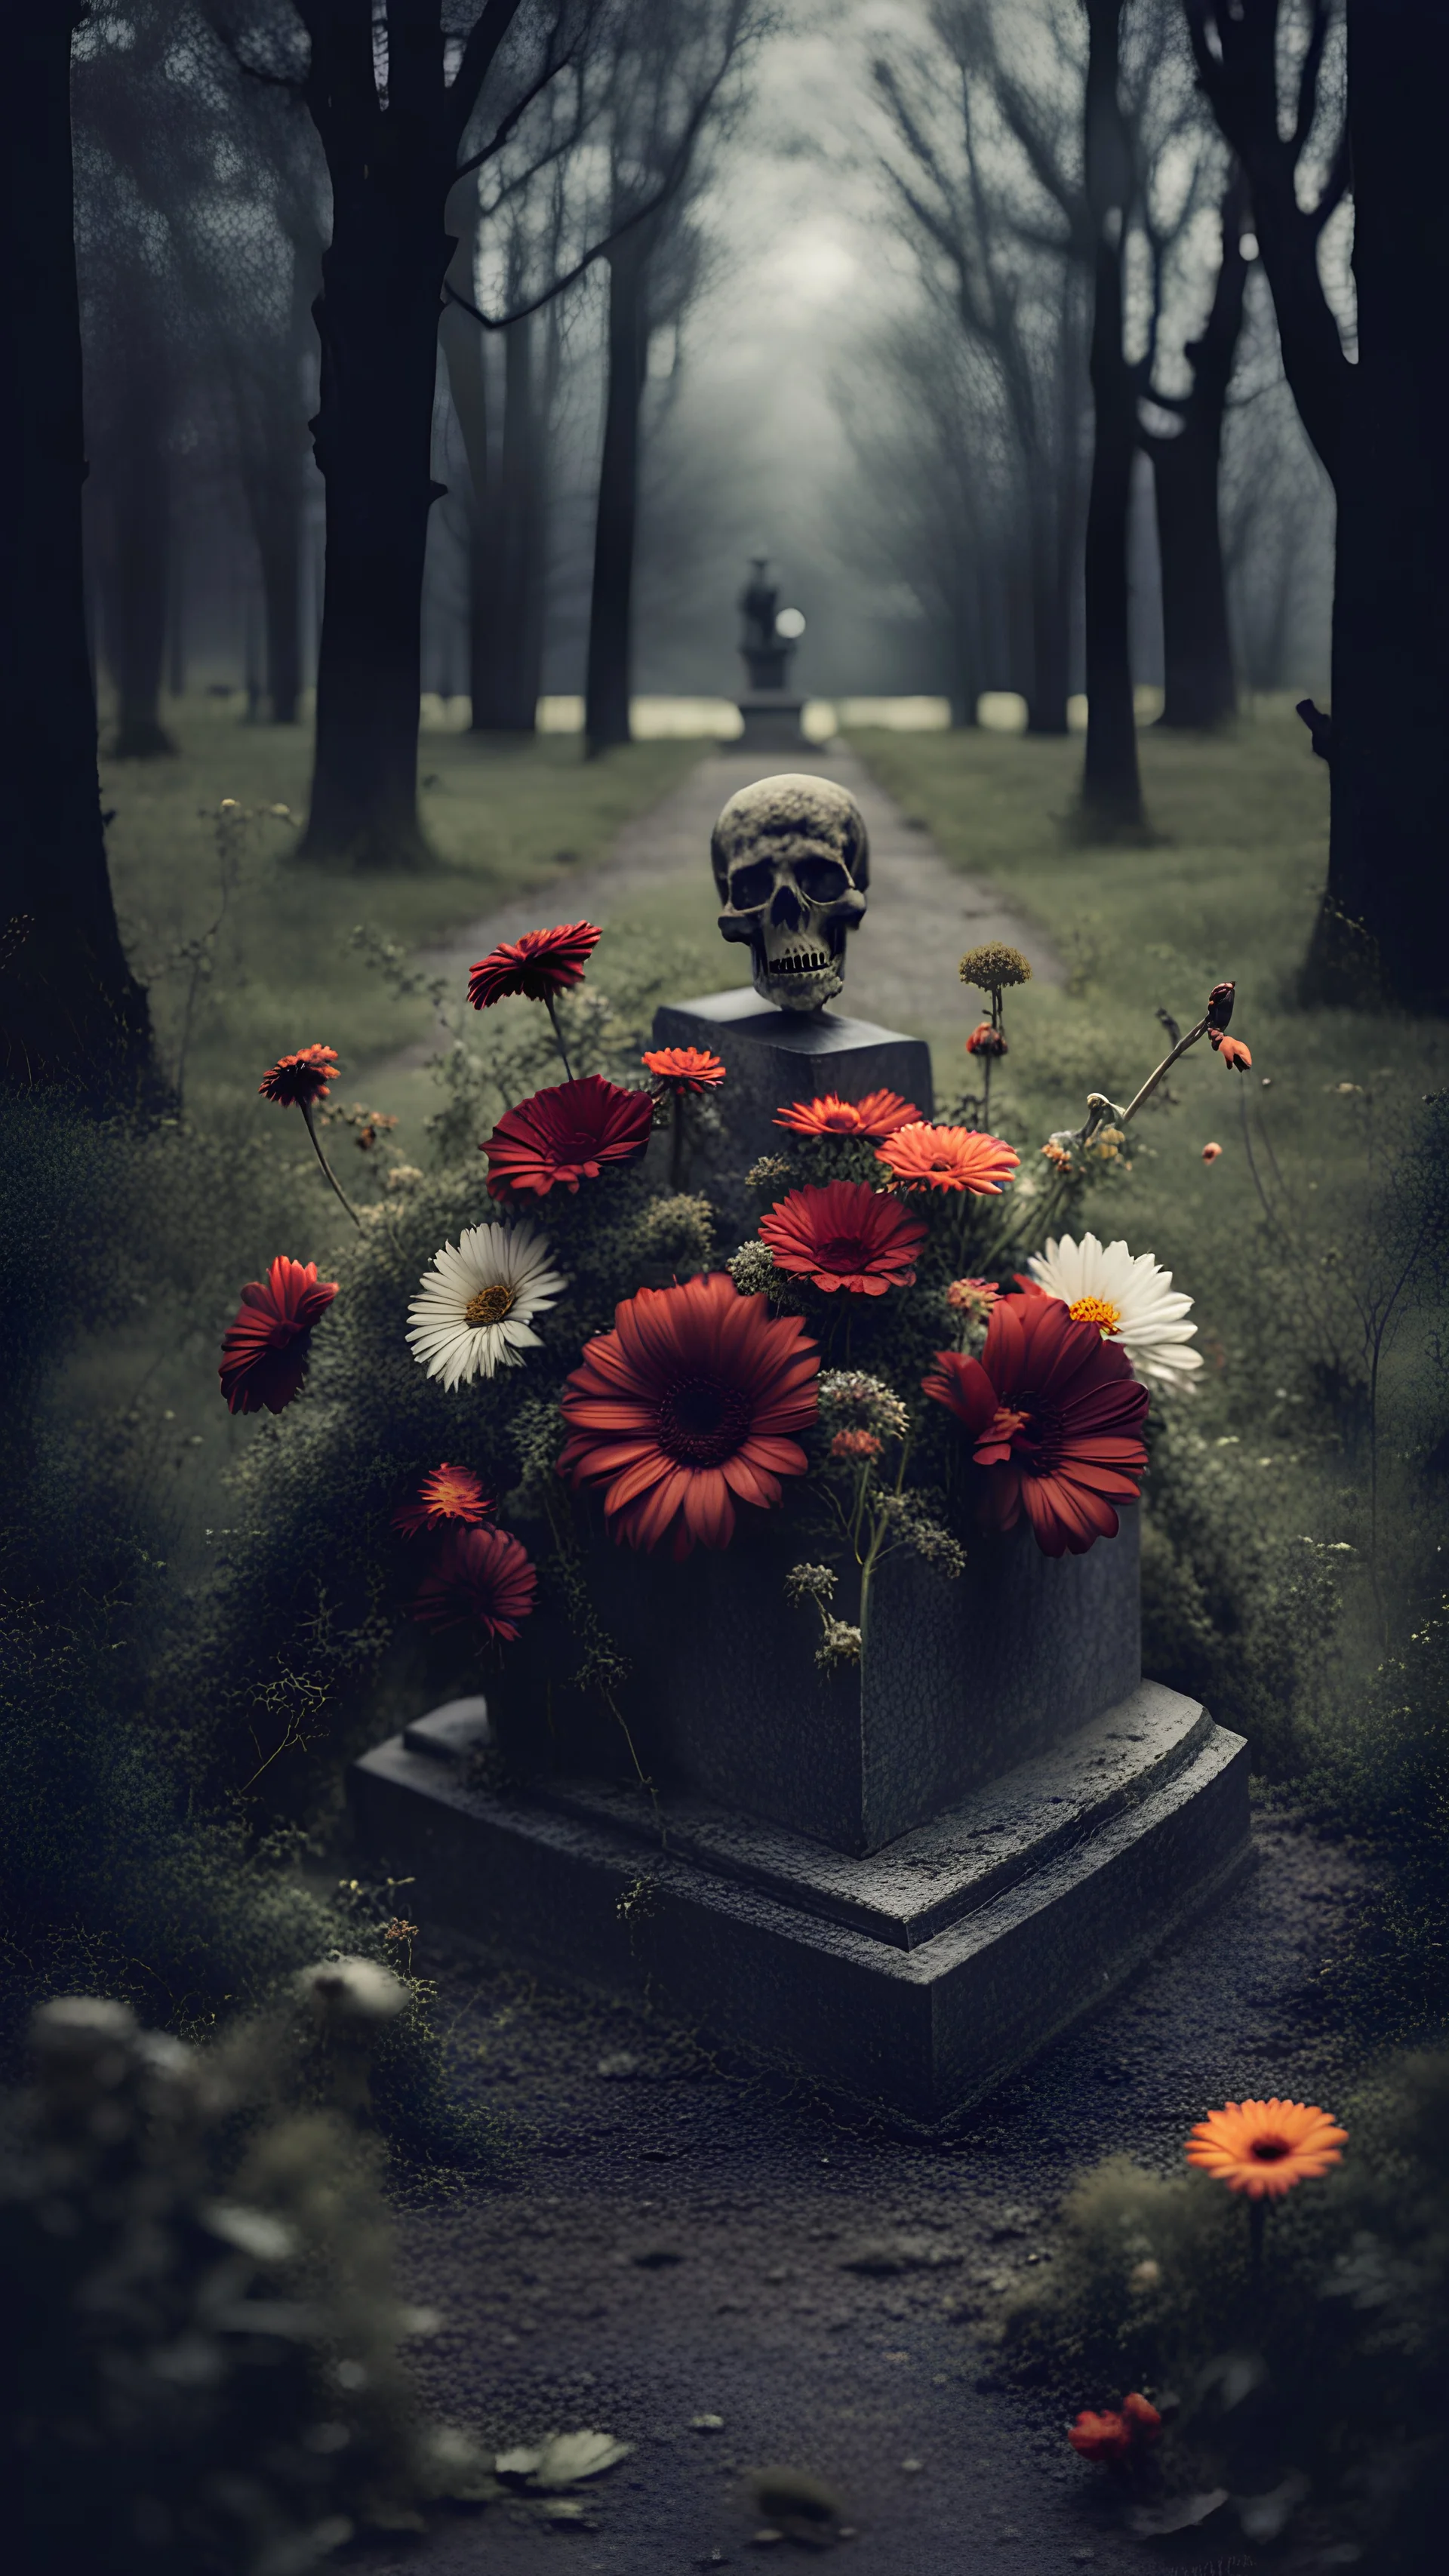 On the old grave lies flowers. horror style